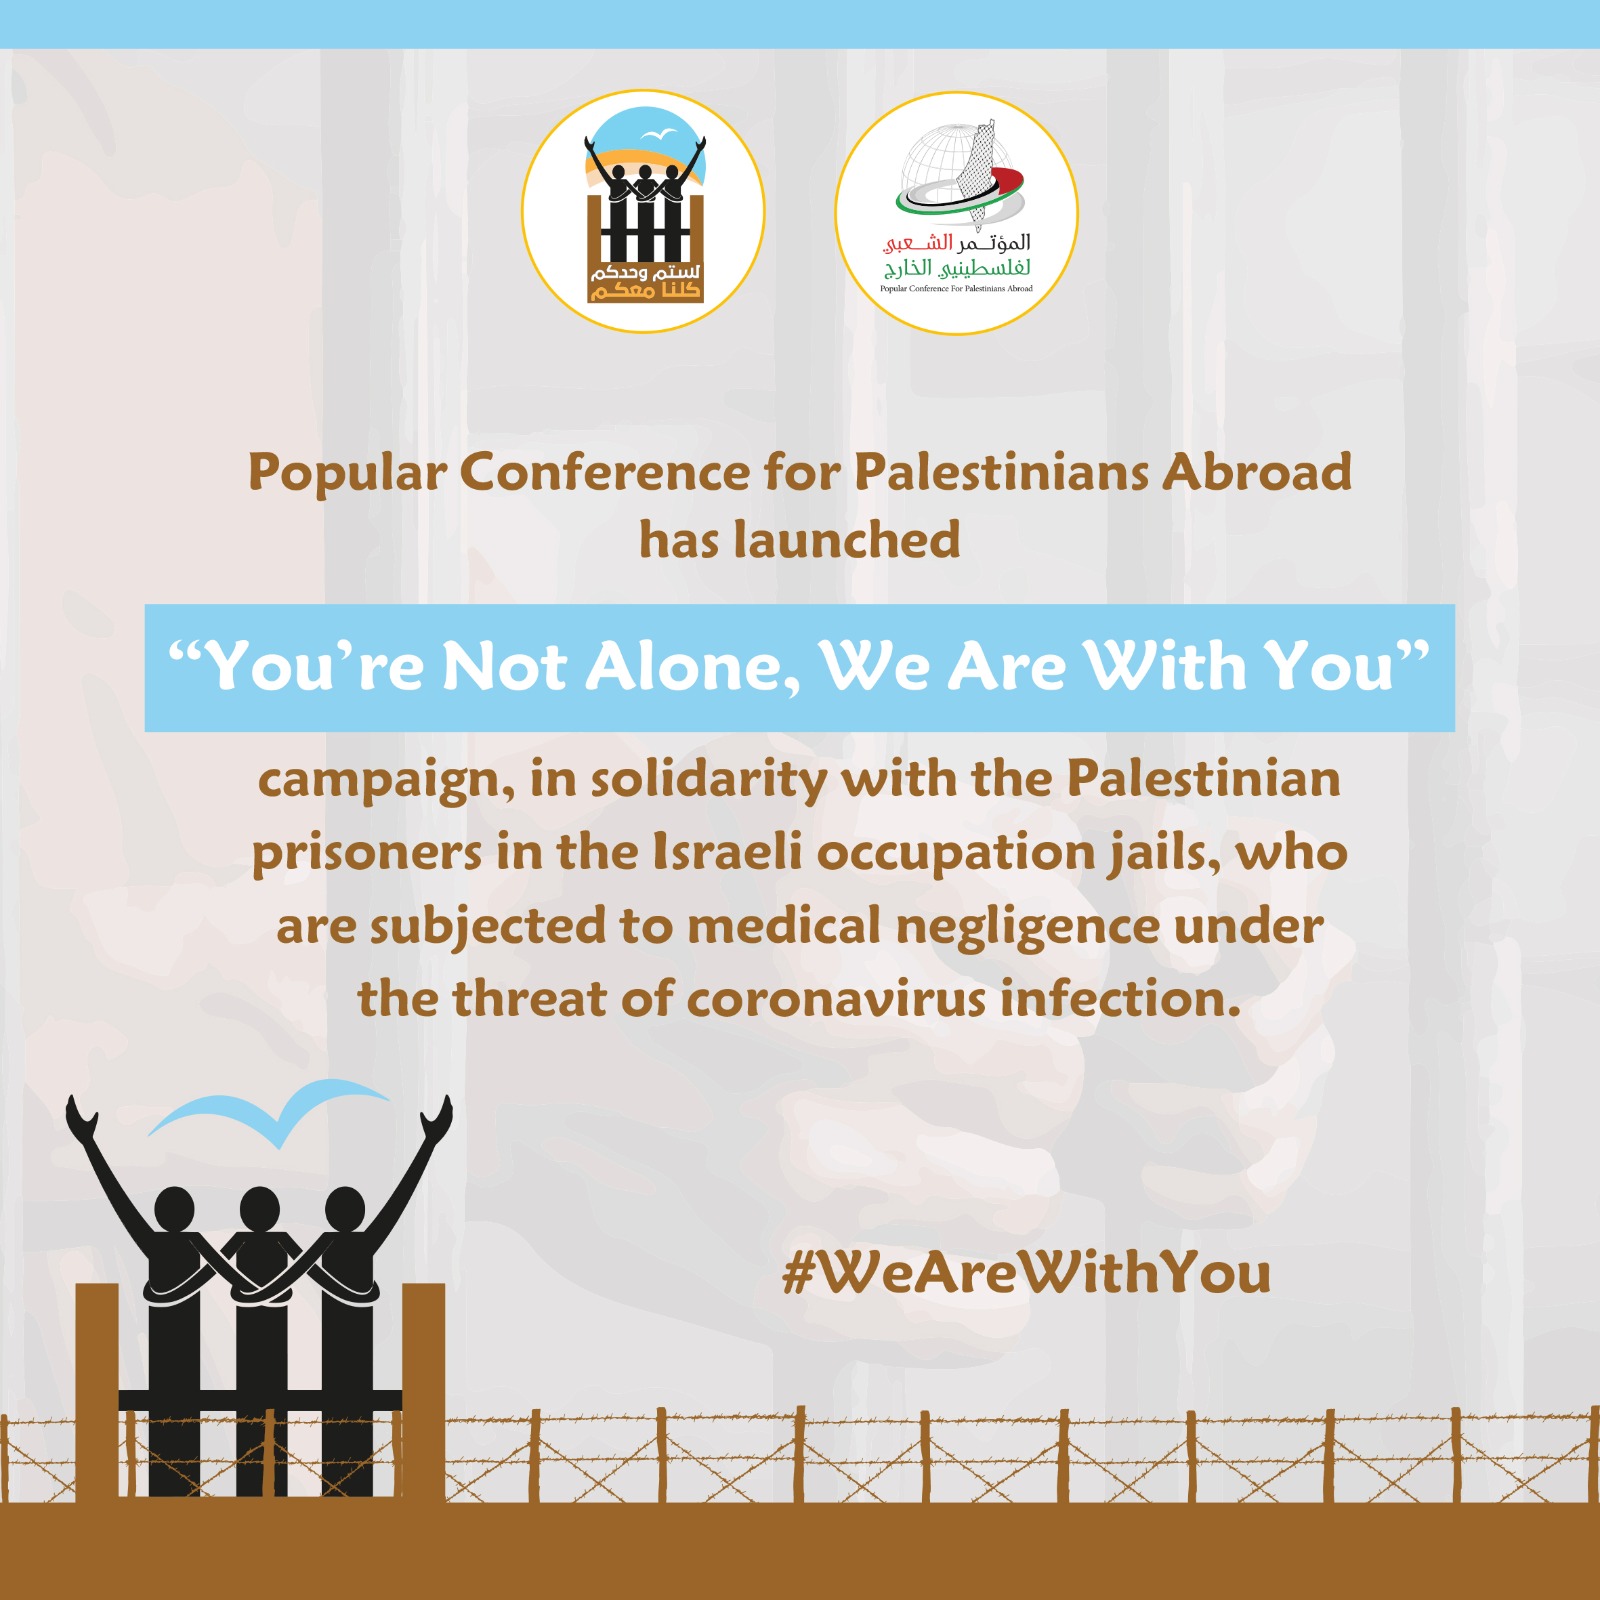 Popular Conference for Palestinians Abroad Launches “You Are Not Alone, We Are With You” Campaign